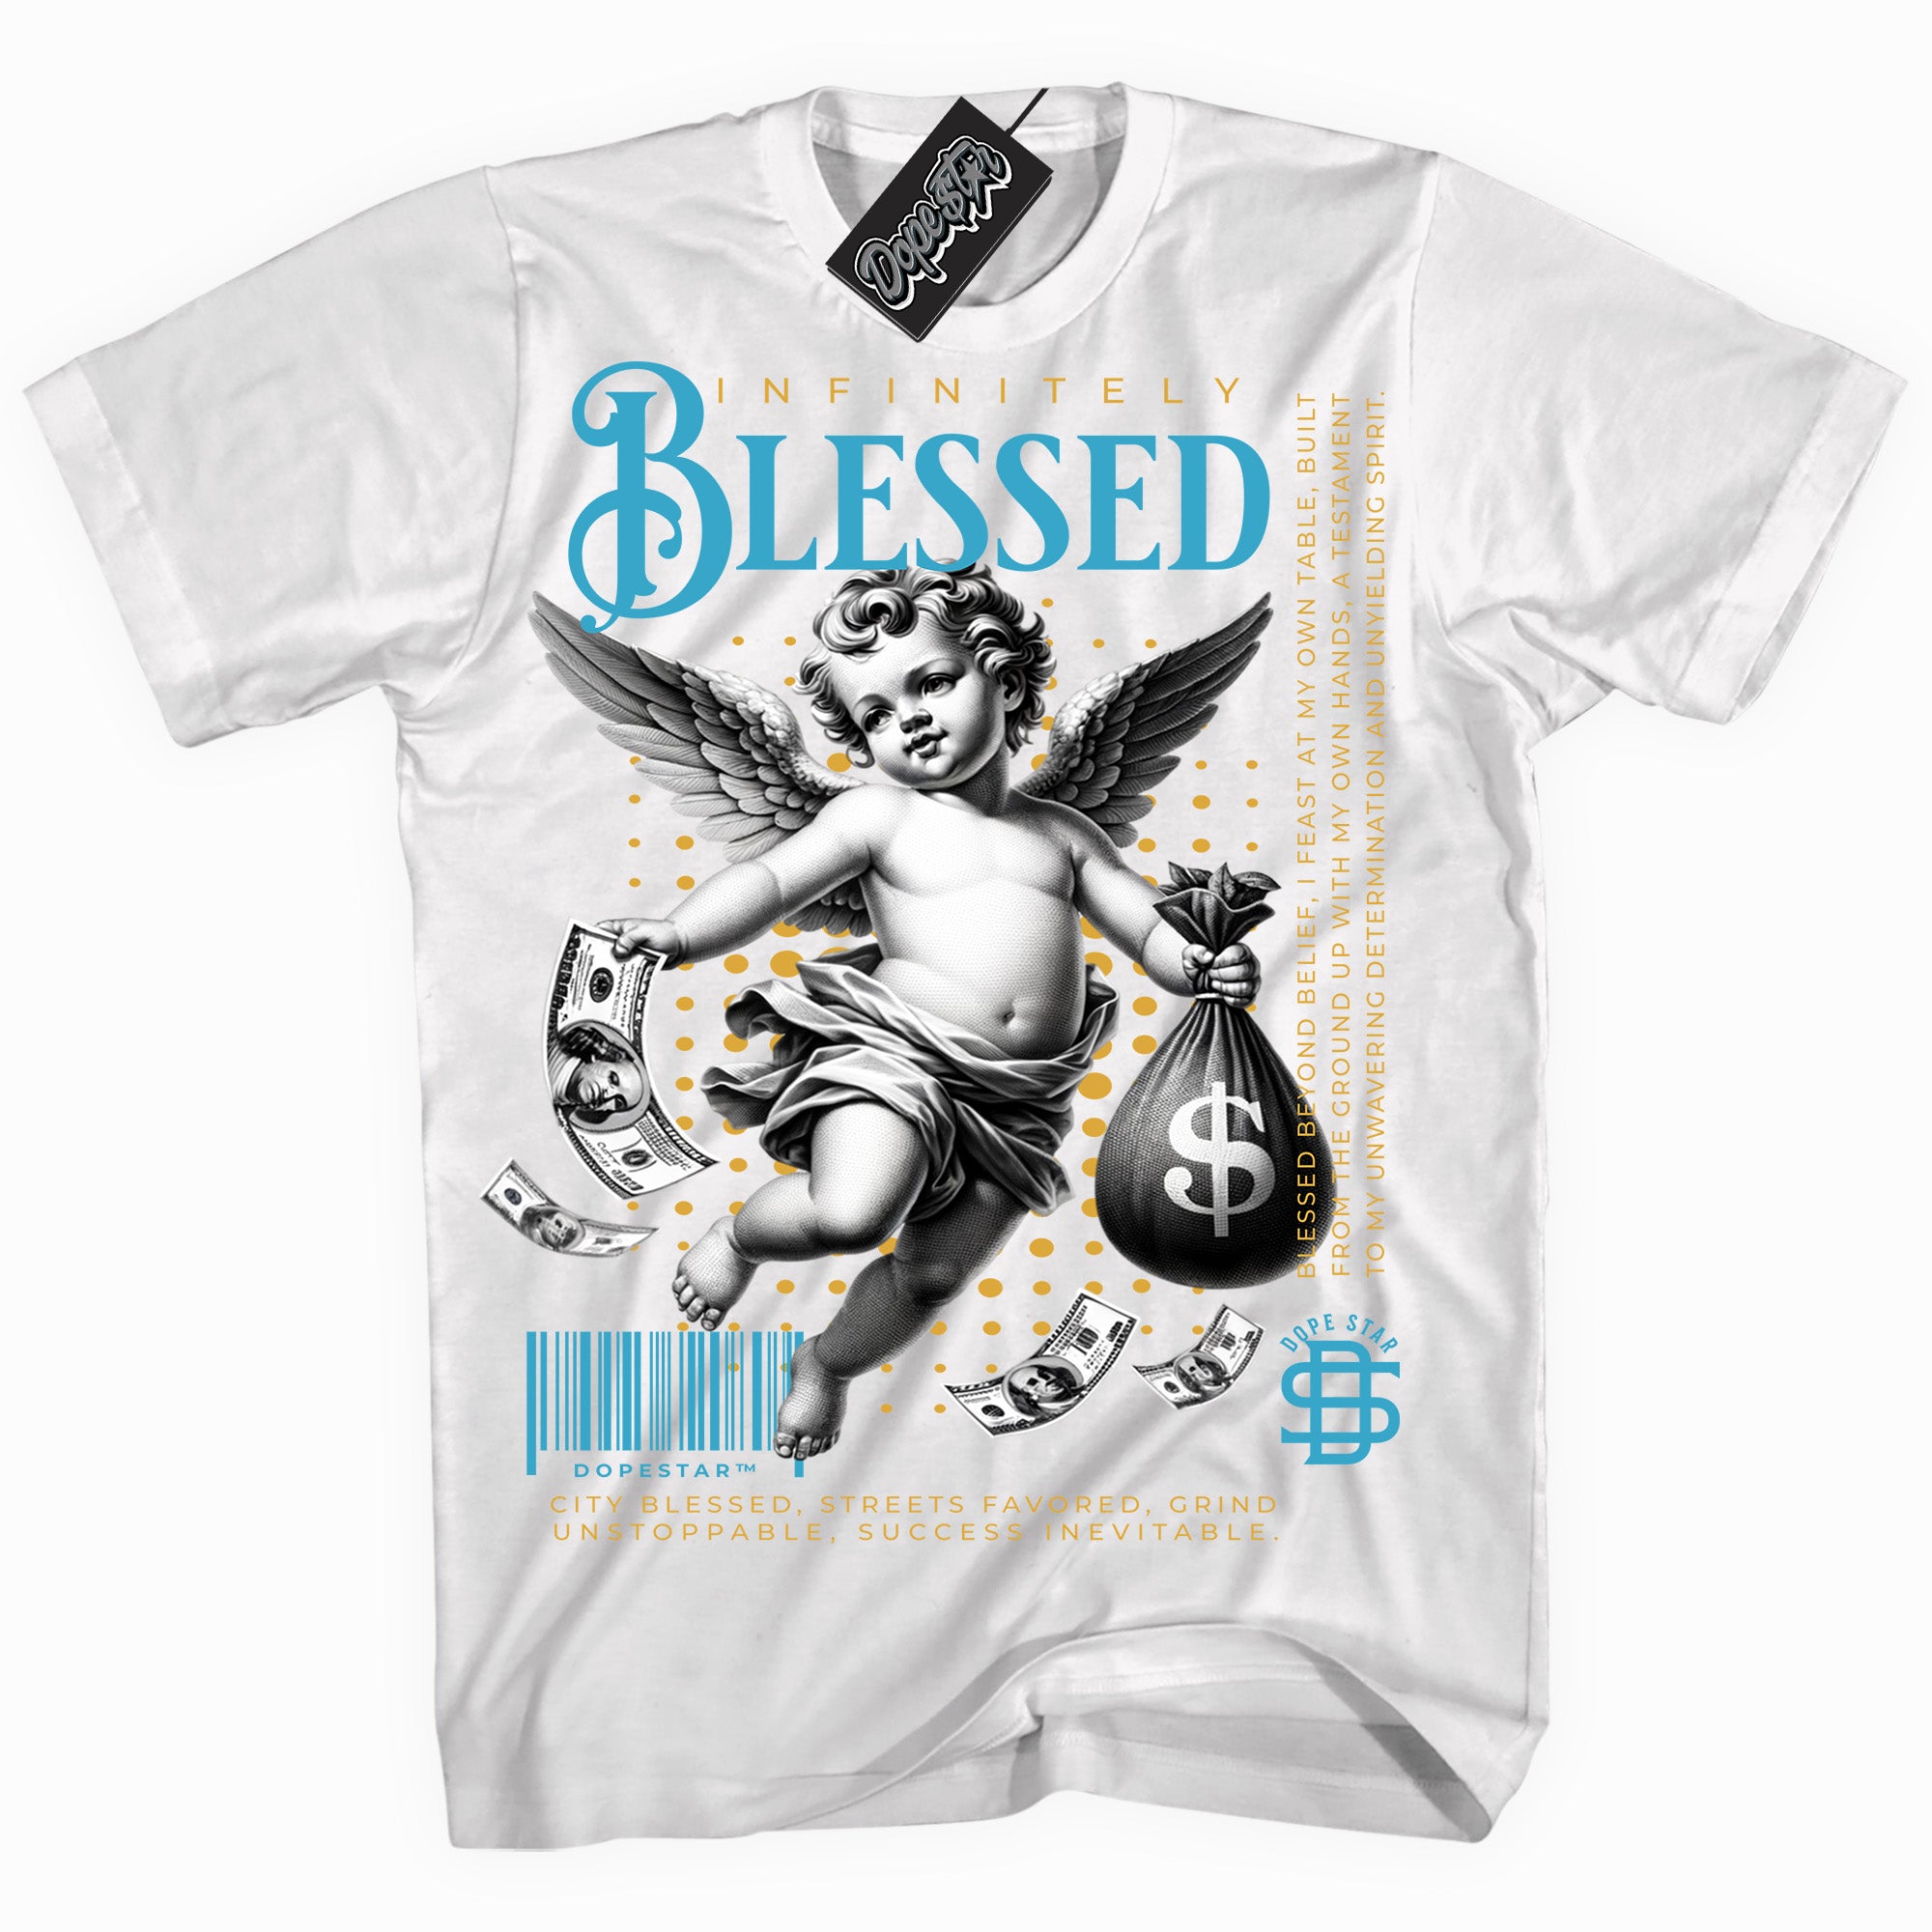 Cool White graphic tee with “ Infinitely Blessed ” print, that perfectly matches AQUA 5s sneakers 